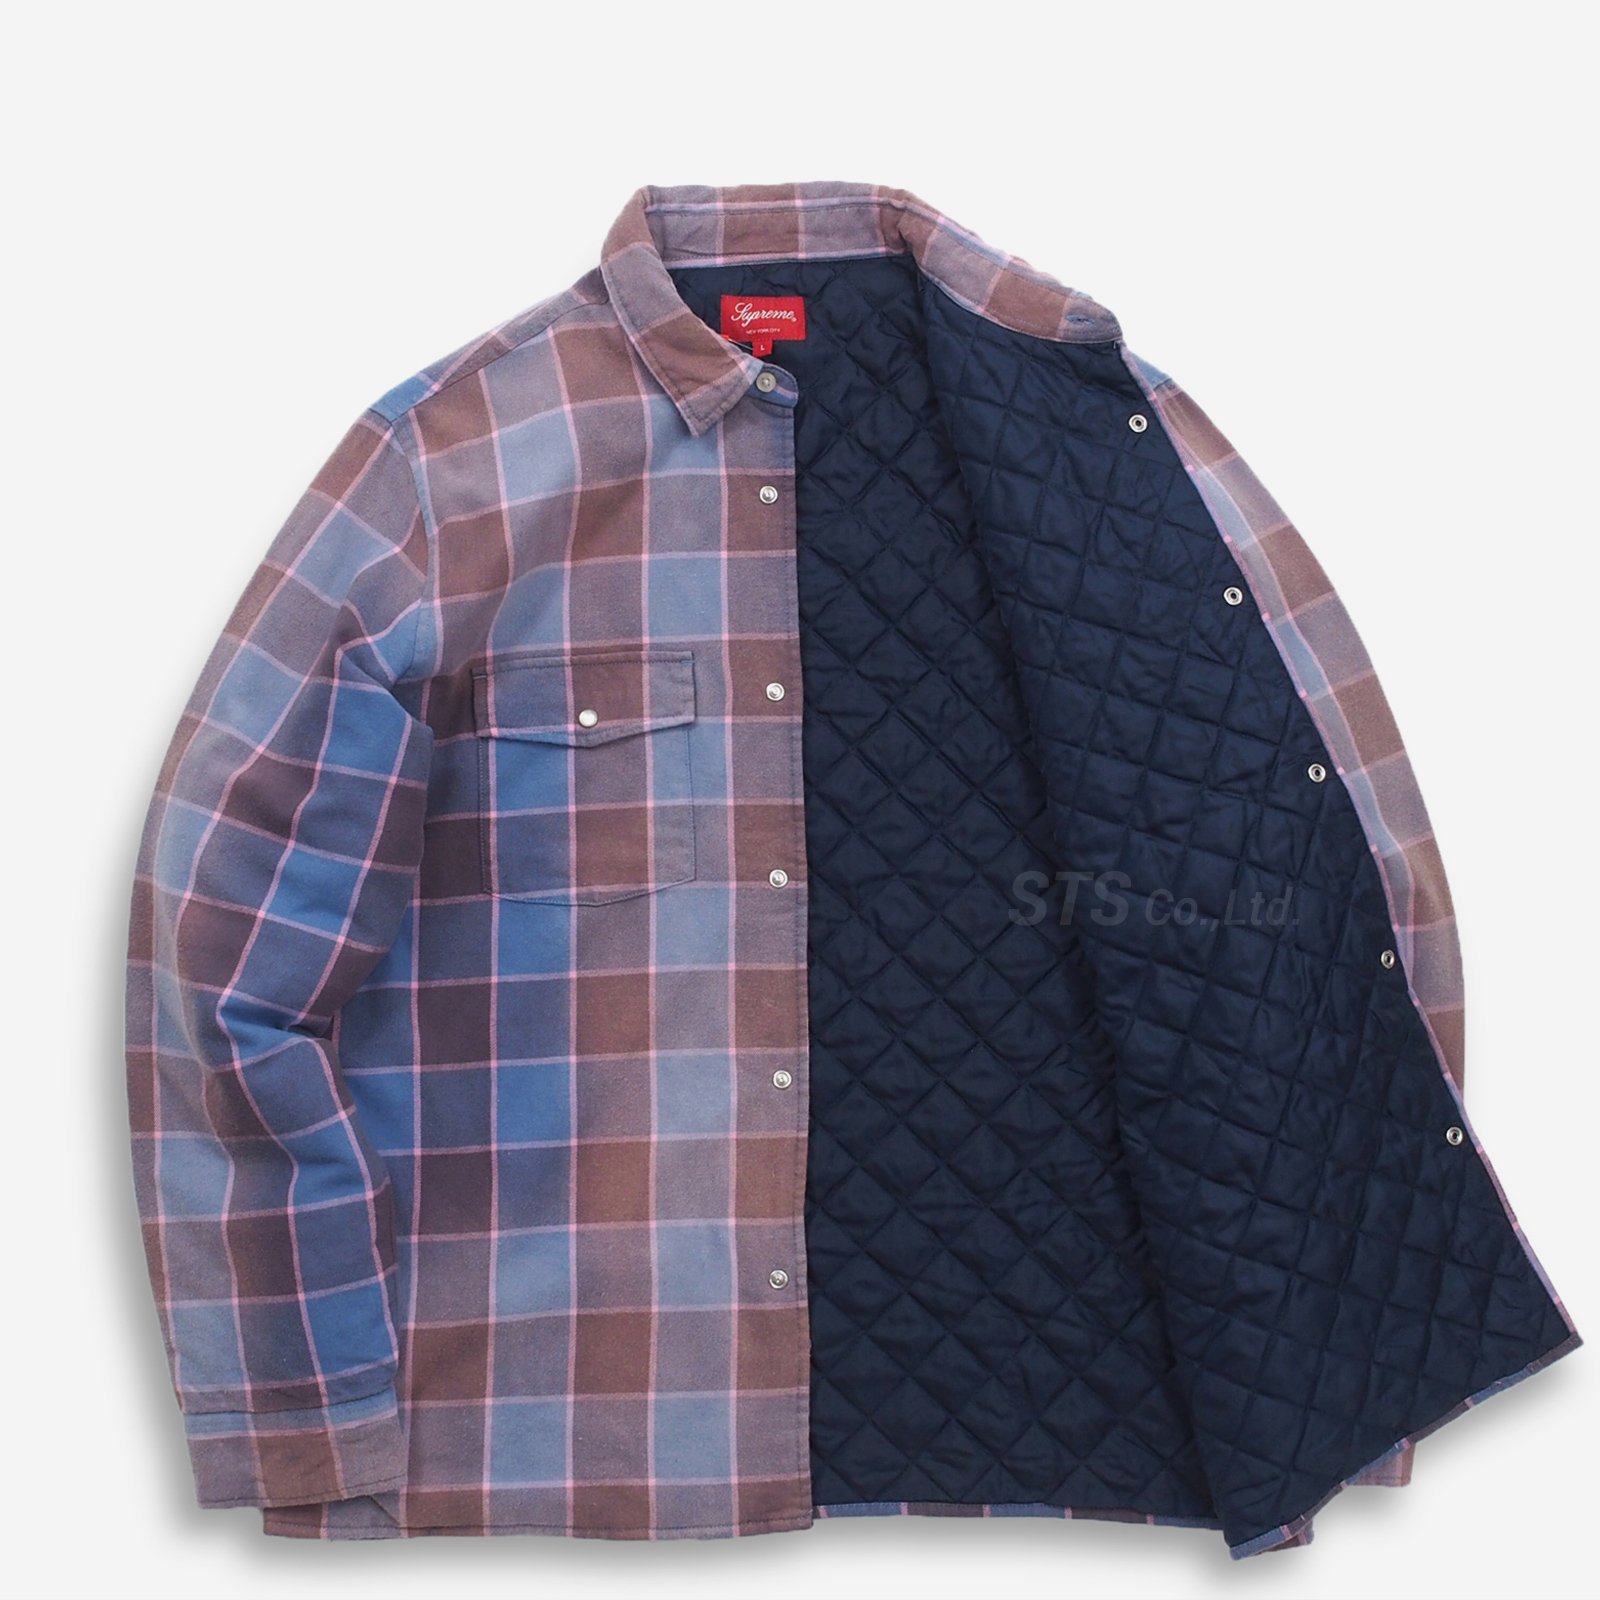 supsupreme quilted faded plaid shirt